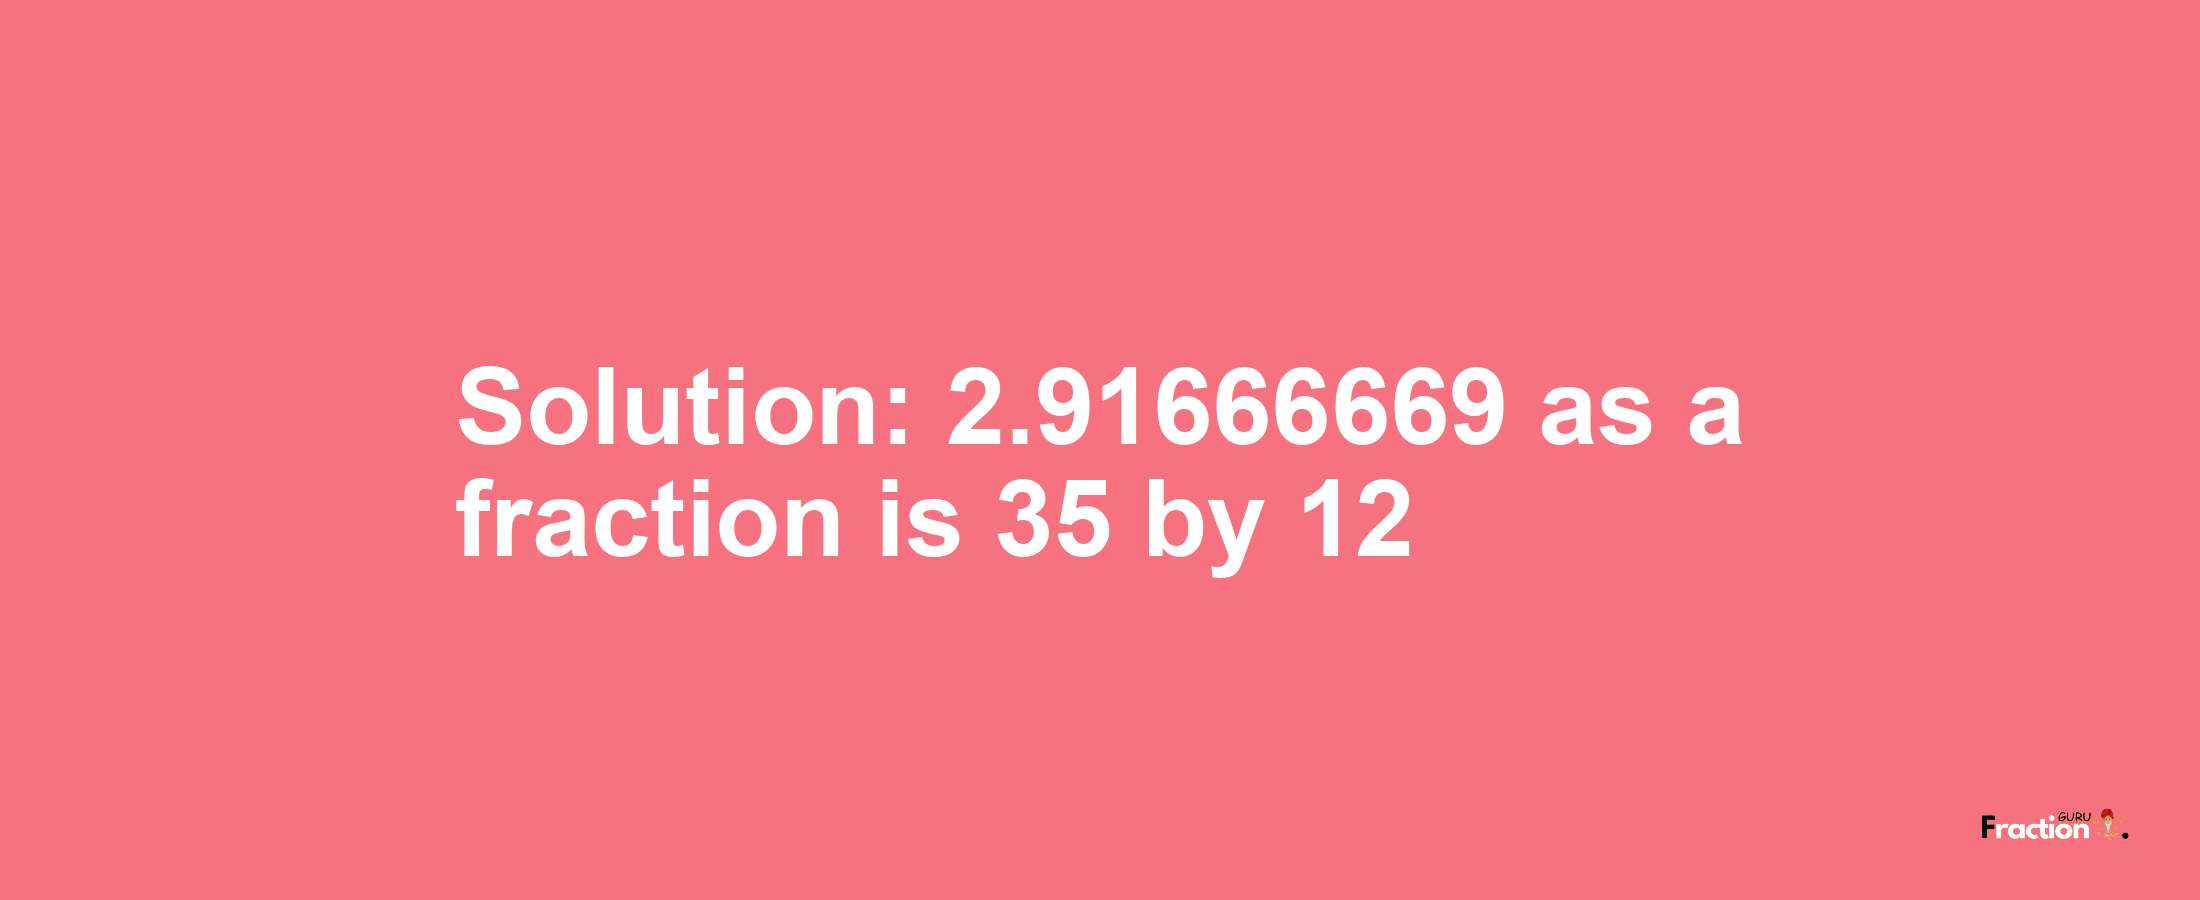 Solution:2.91666669 as a fraction is 35/12